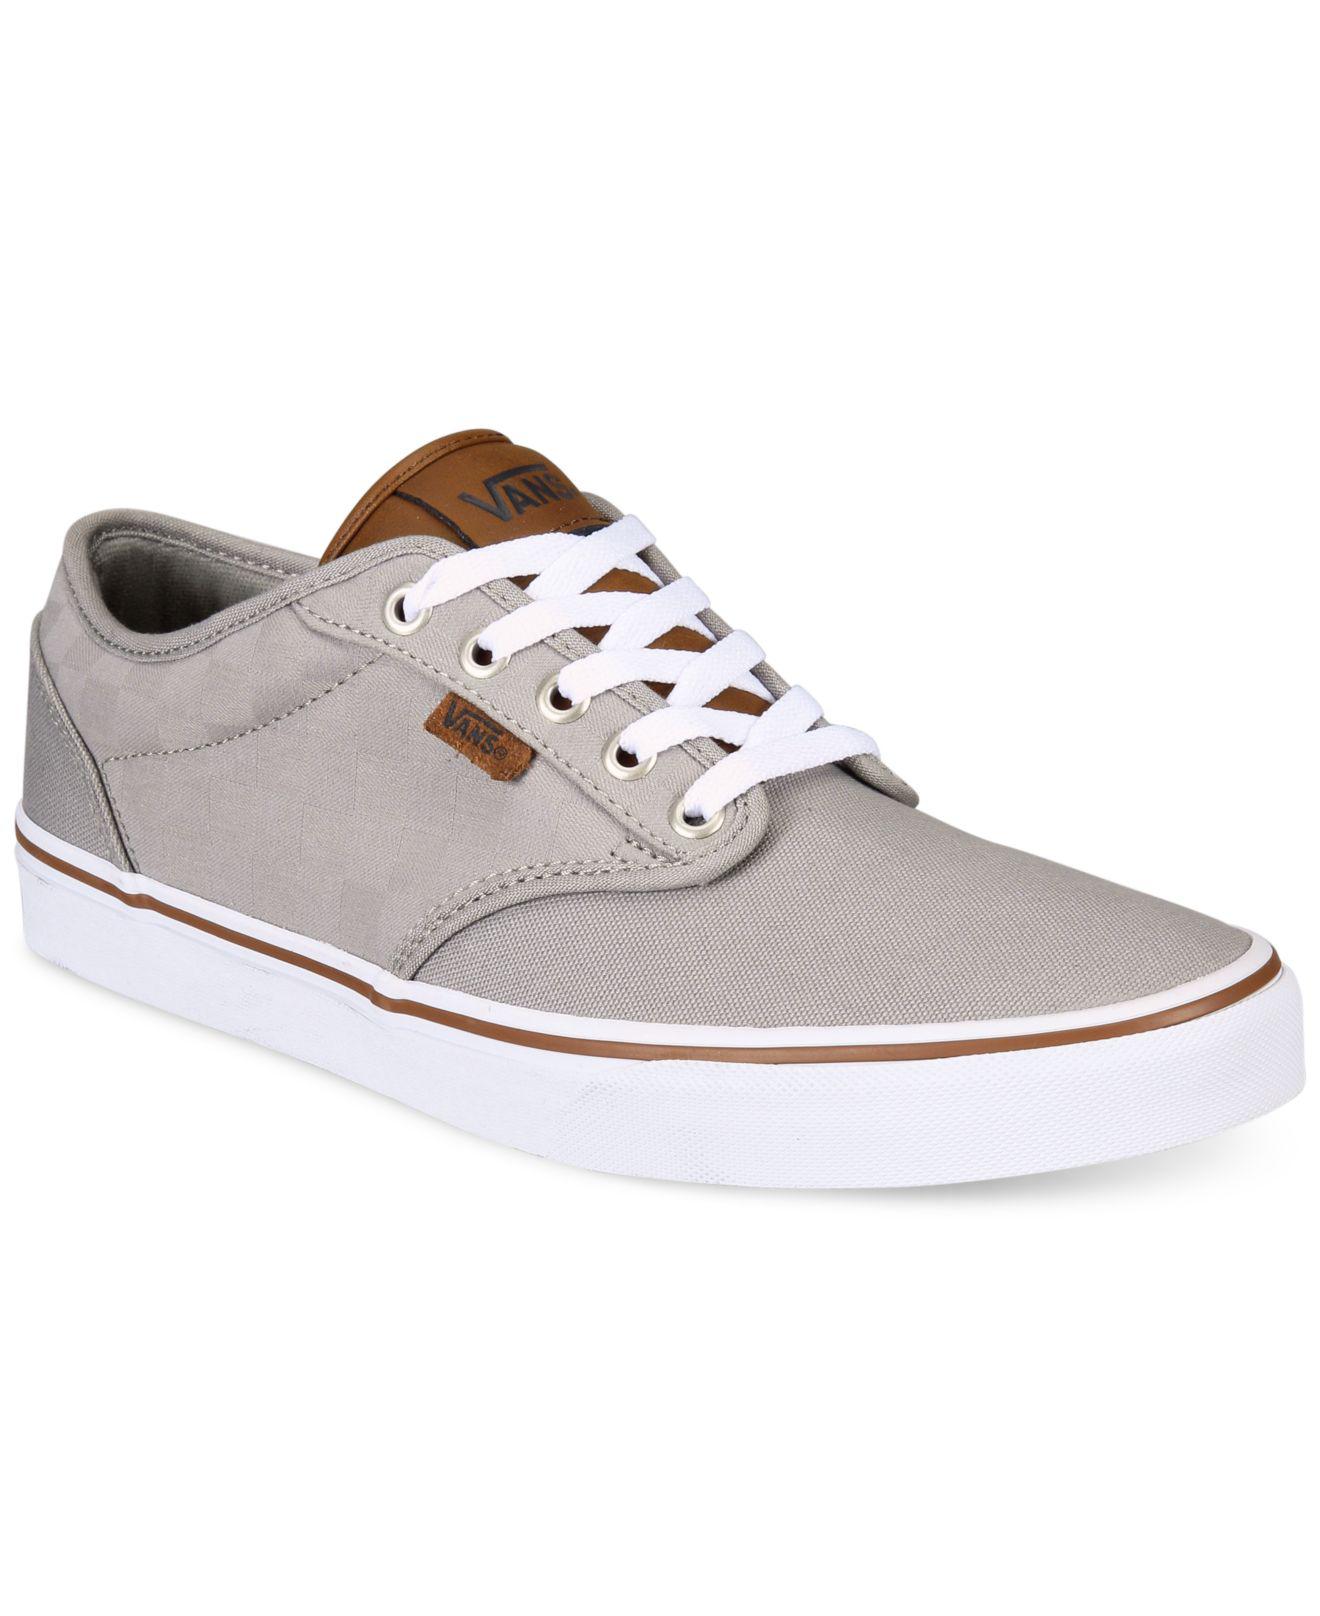 Vans Men's Atwood Check Canvas Sneakers in Gray for Men - Lyst